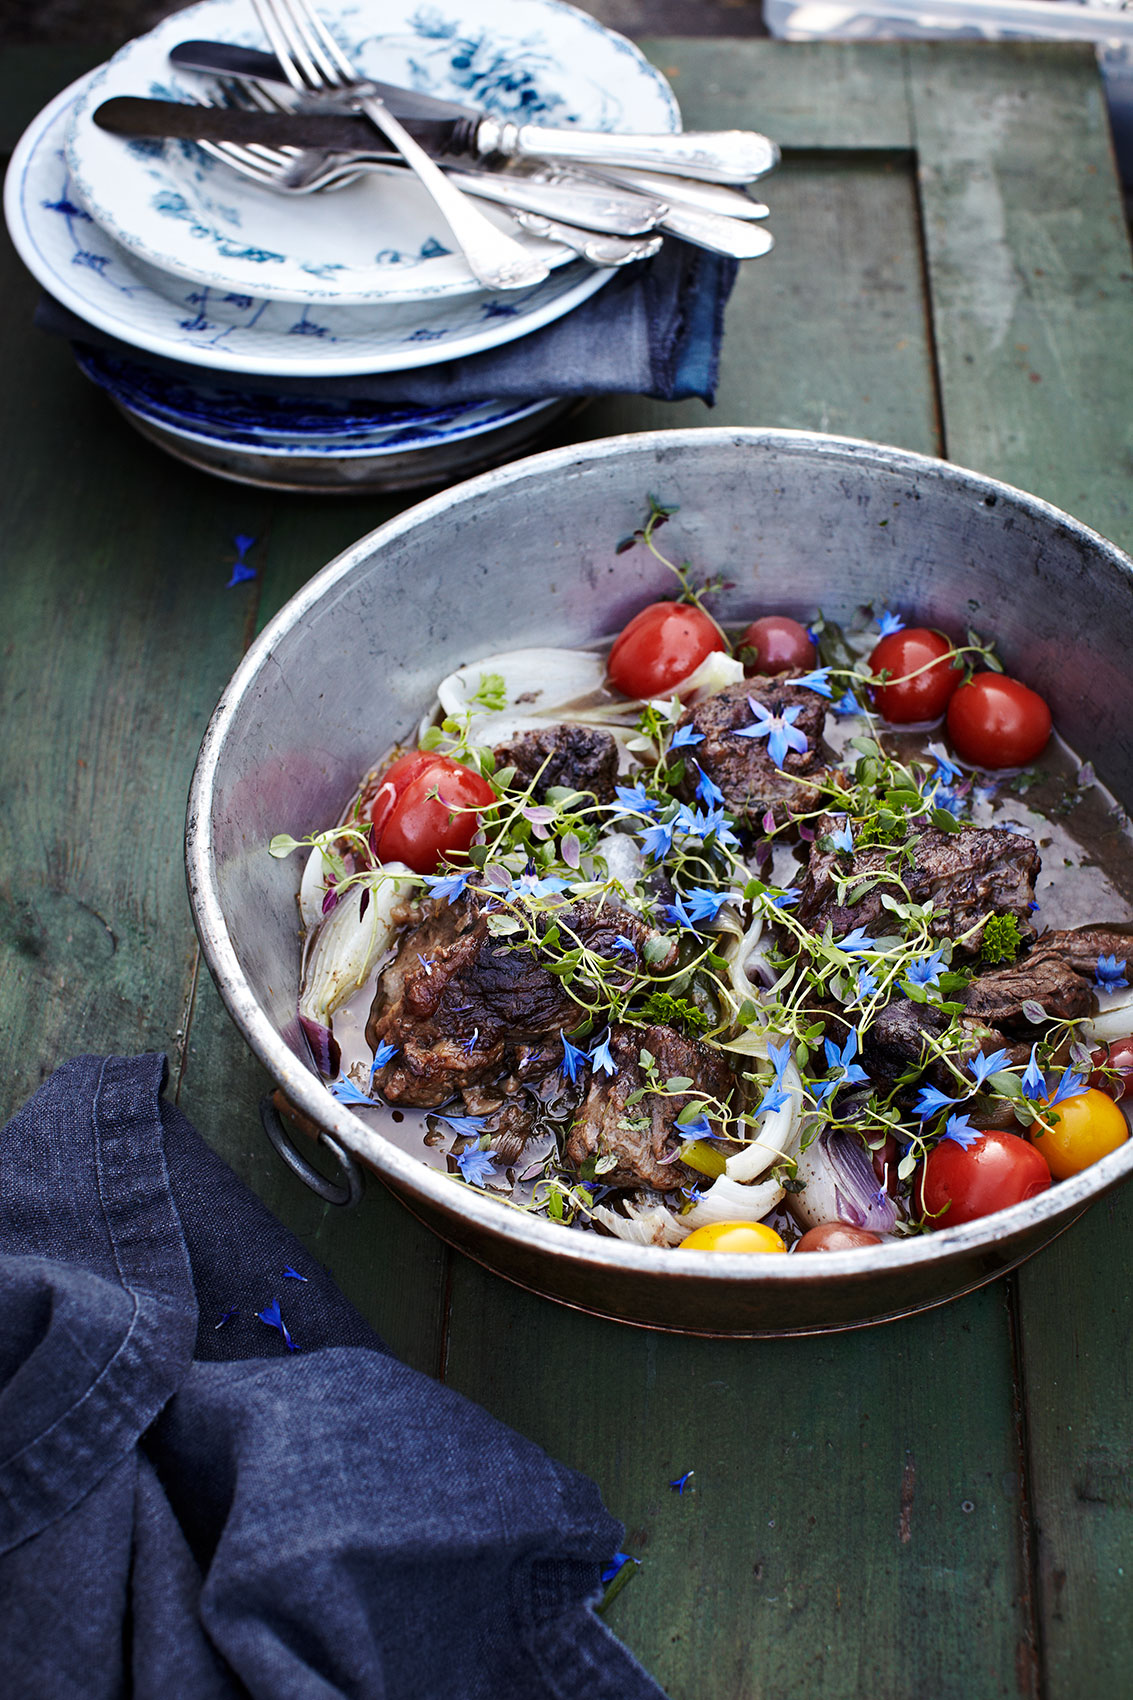 Stedsans in the Woods • Brisket with Wild Flowers & Cherry Tomatoes • Lifestyle & Editorial Food Photography